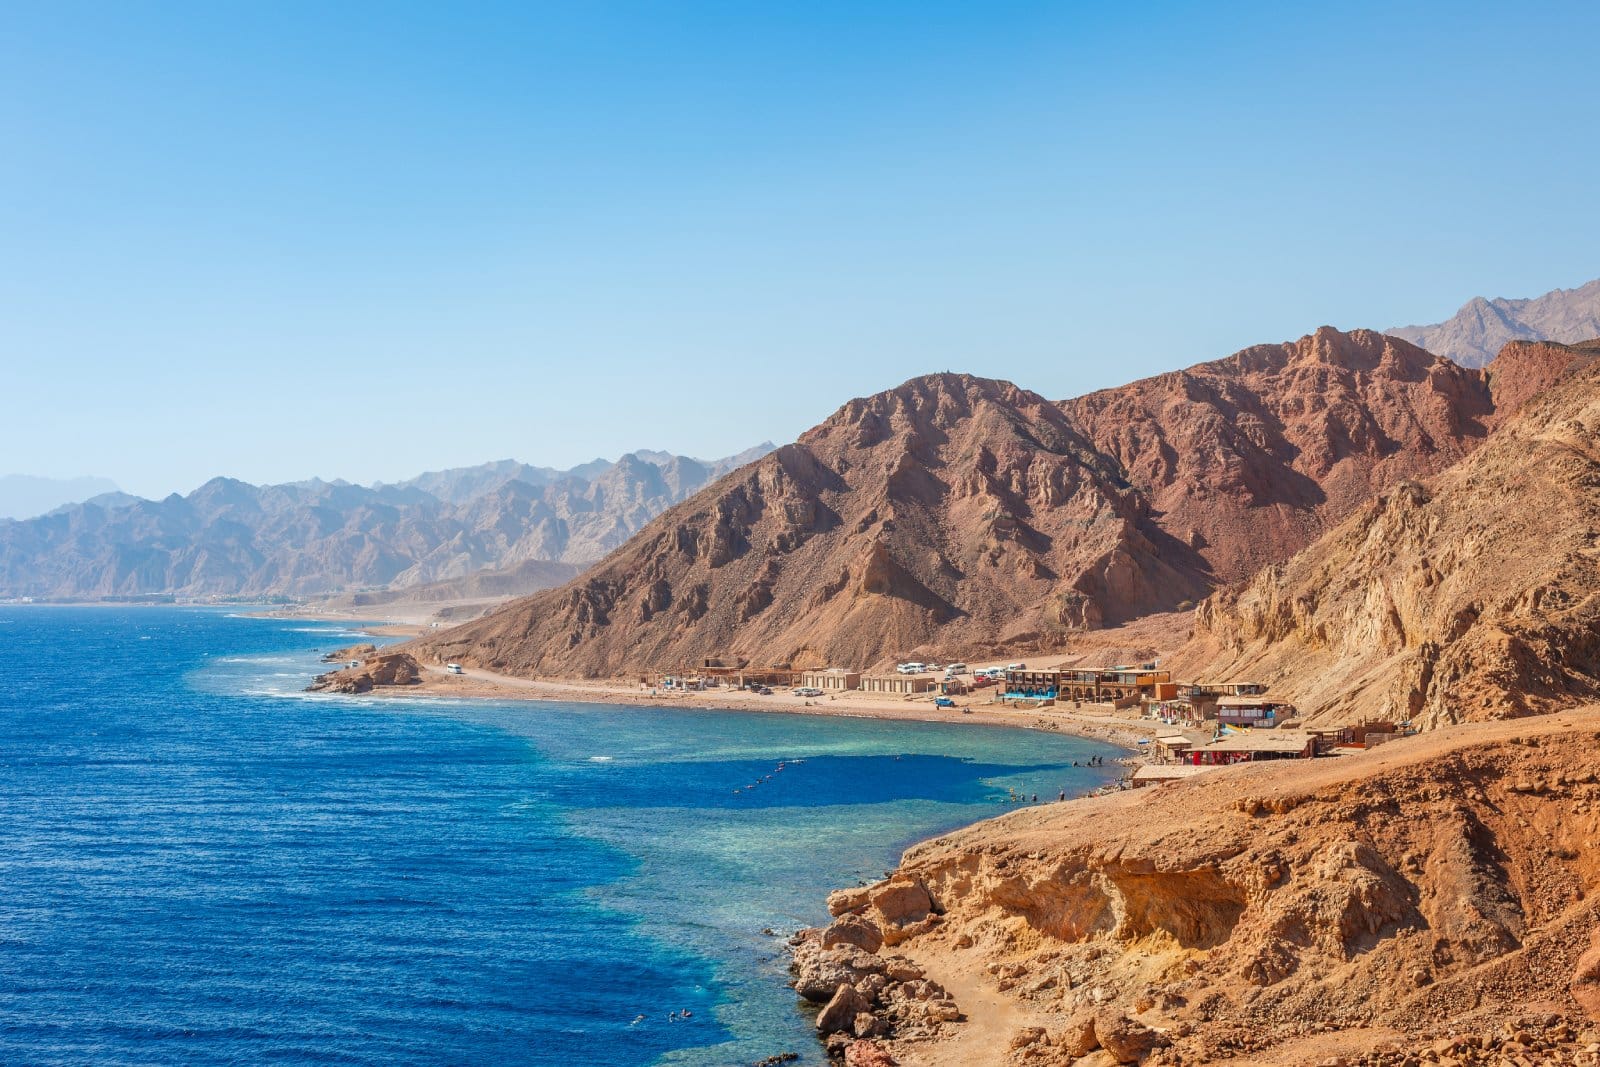 <p class="wp-caption-text">Image Credit: Shutterstock / Oleg_P</p>  <p><span>Dahab, on the southeast coast of the Sinai Peninsula, is a laid-back town that has long been a favorite among backpackers, divers, and those searching for a peaceful retreat. Known for its golden beaches, the Blue Hole, and the vibrant coral reefs just offshore, Dahab offers some of the best diving and snorkeling in the world. The town’s relaxed atmosphere is complemented by a range of activities, from yoga and windsurfing to desert safaris and mountain climbing in the nearby Sinai mountains. Dahab’s blend of natural beauty, adventure opportunities, and Bedouin culture makes it a unique destination within Egypt, offering a different pace of life and a chance to connect with the natural environment.</span></p>